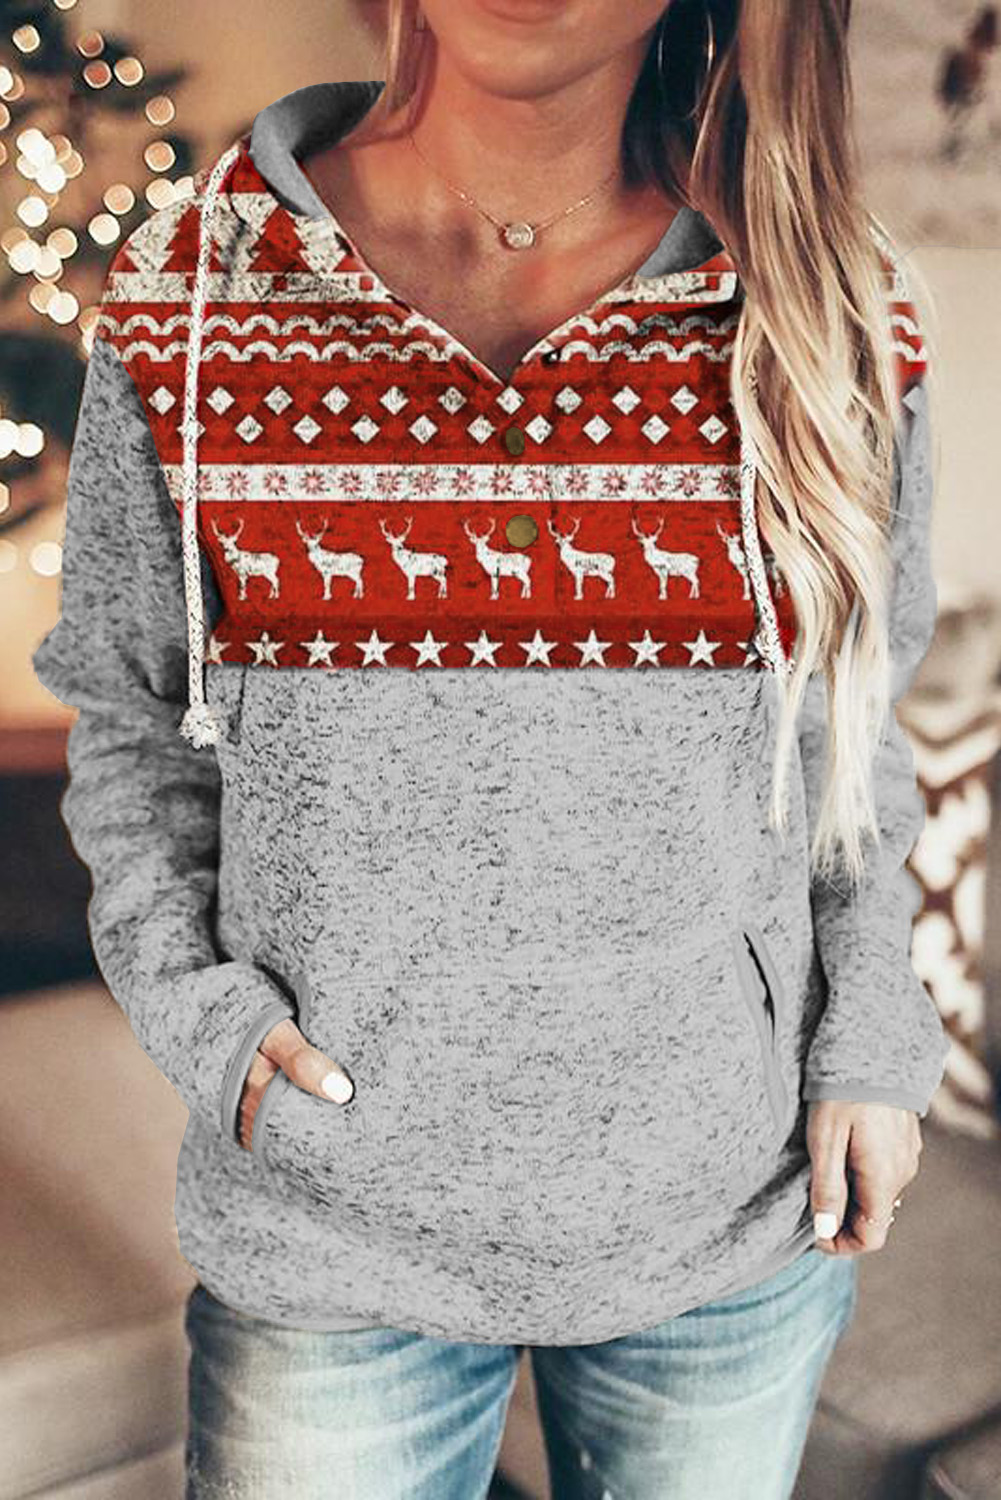 US$ 10.33 Drop-shipping Christmas Reindeer Print Stitching Hoodie for Women